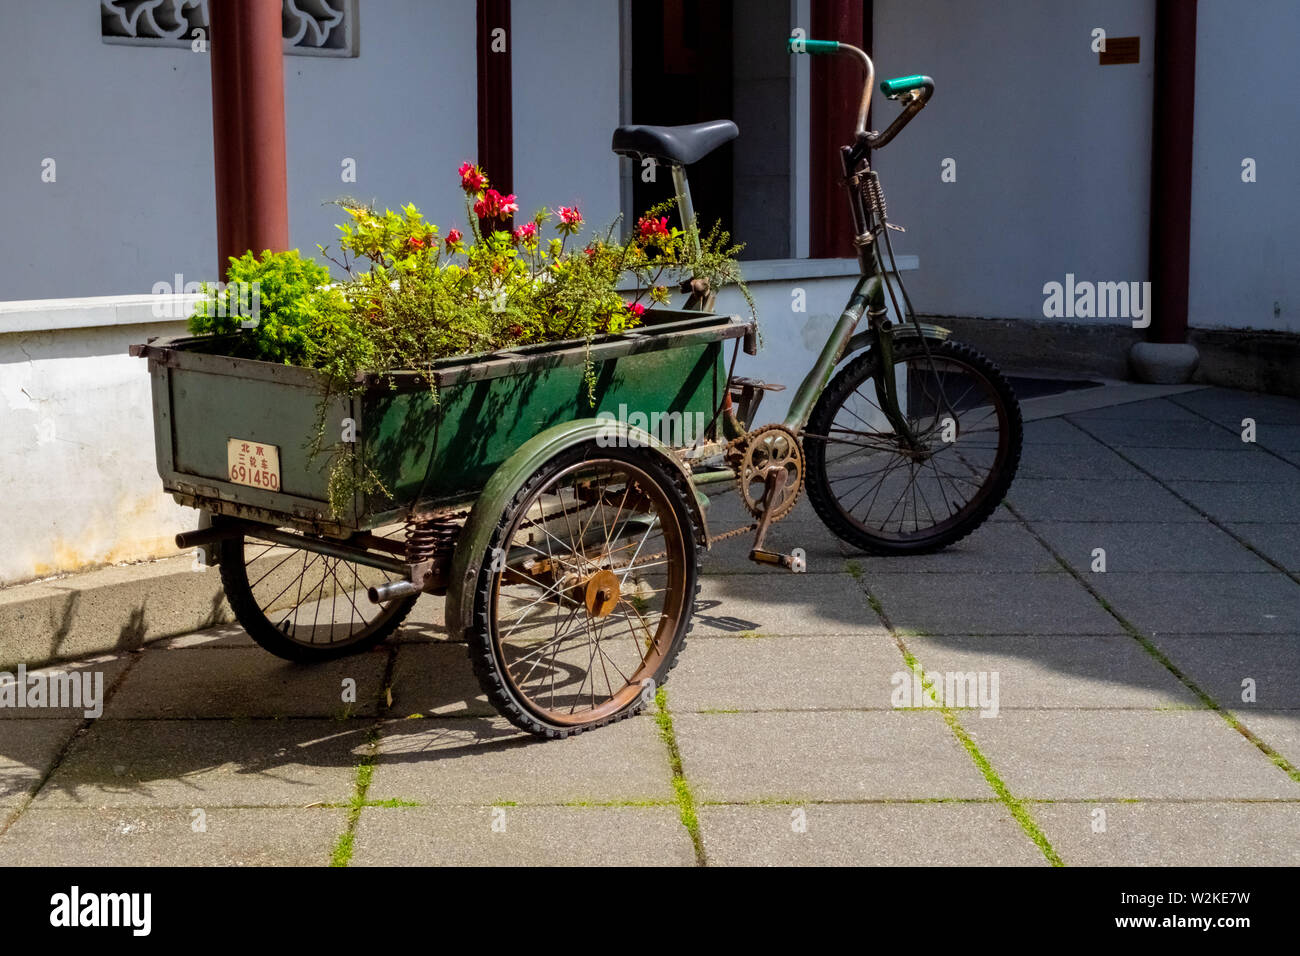 Ancient Tricycle with a Large Green Basket Full of Plants and Flowers at Dr. Sun Yat-Sen Classical Chinese Garden in Chinatown Vancouver BC Canada Stock Photo